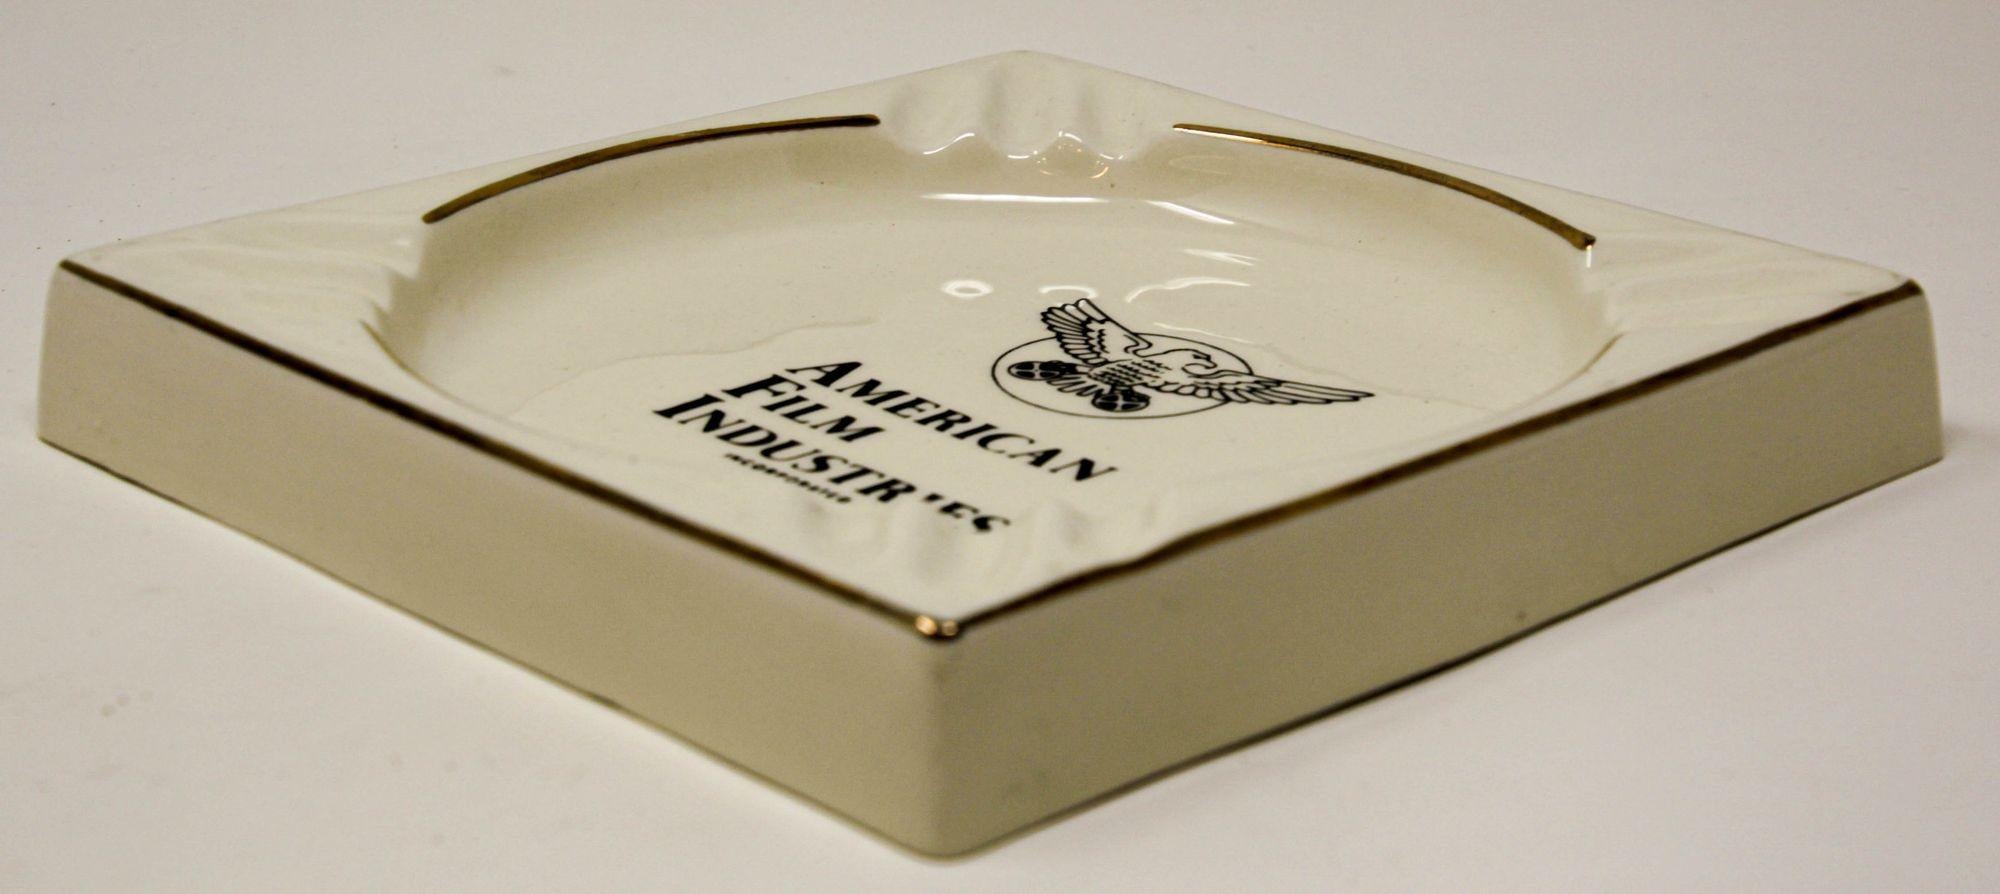 Vintage American Film Industries Incorporated Large Ceramic Ashtray For Sale 1